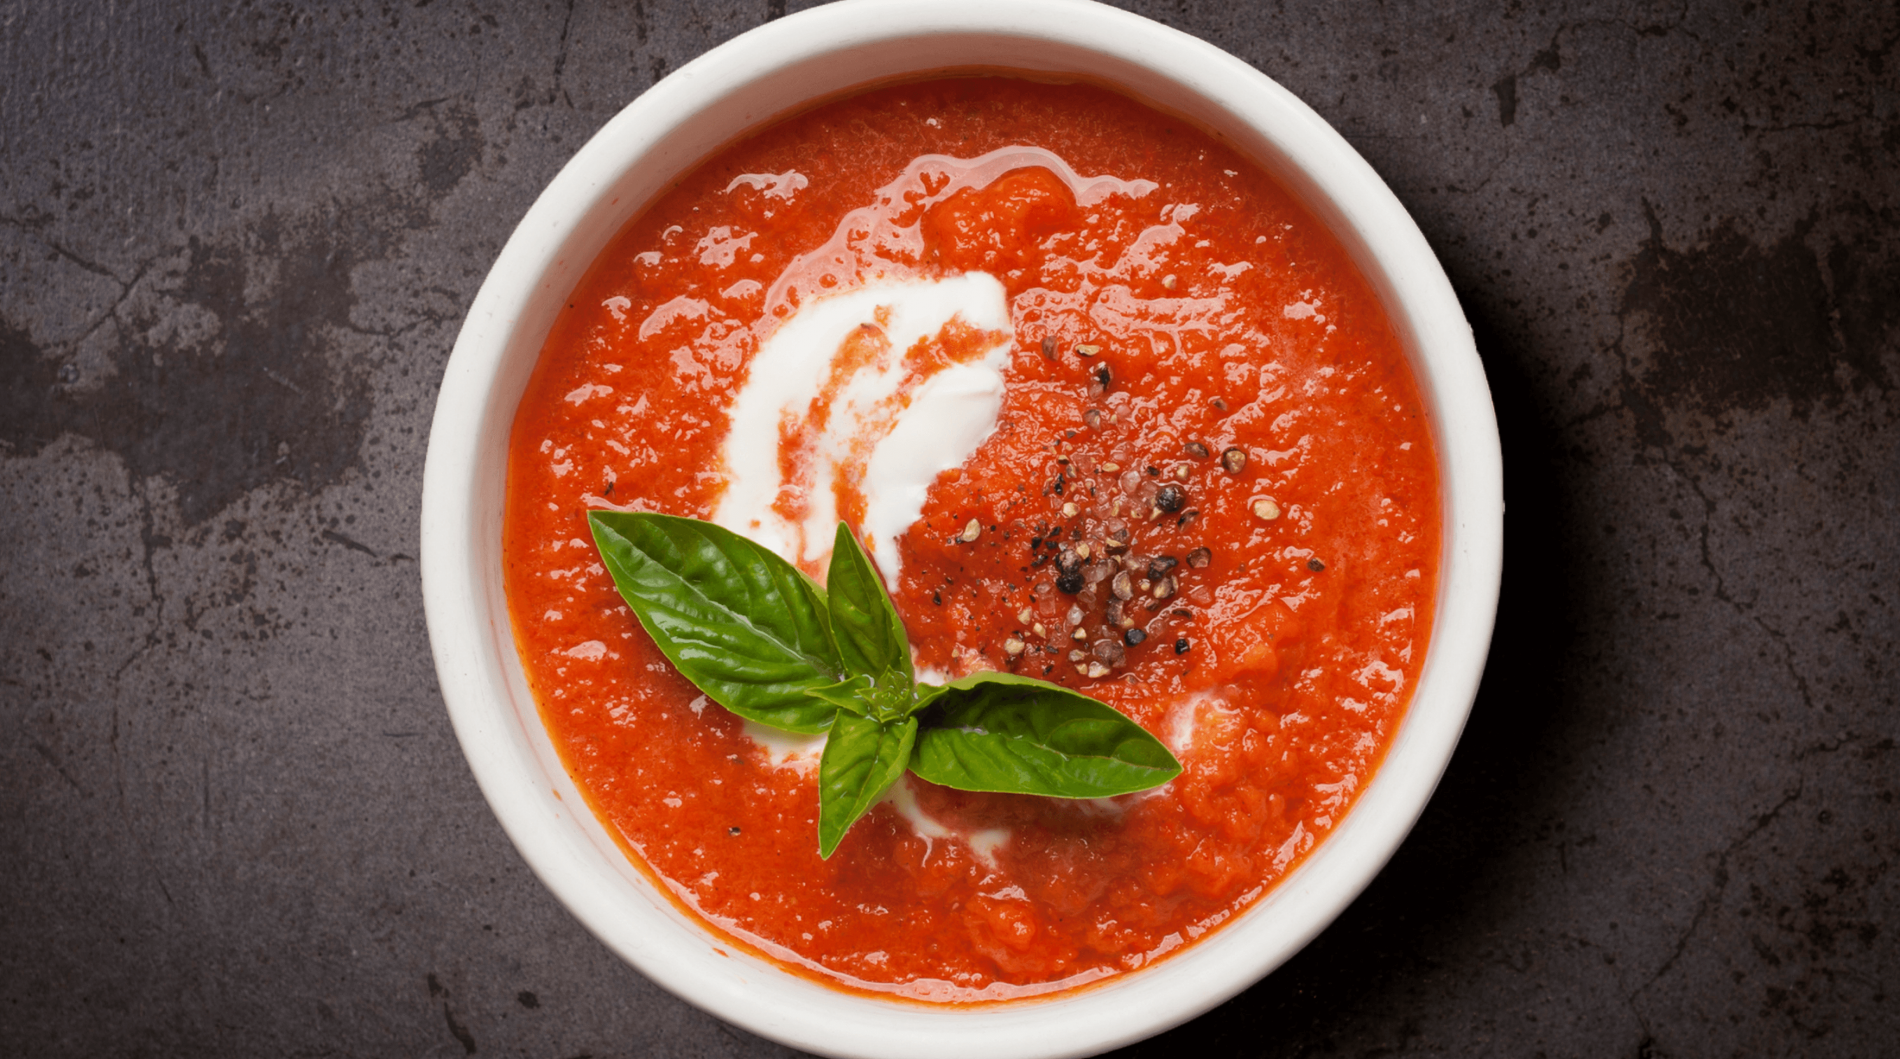 Roasted red pepper and tomato soup